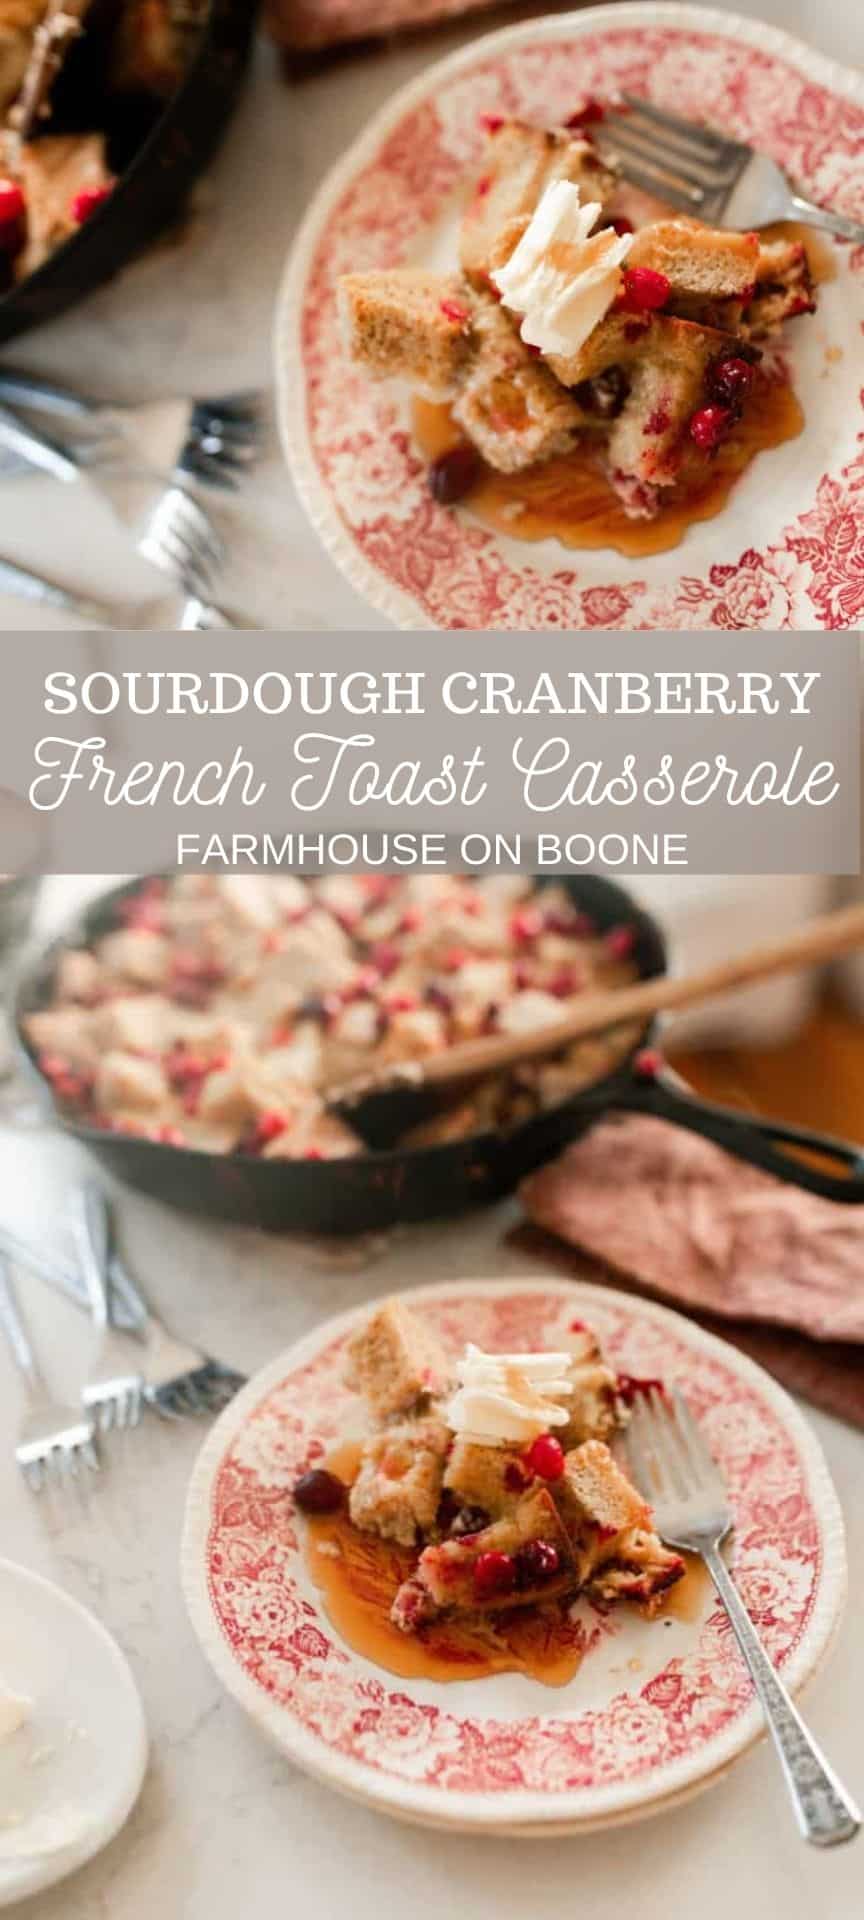 Cranberry French Toast Casserole - Farmhouse on Boone